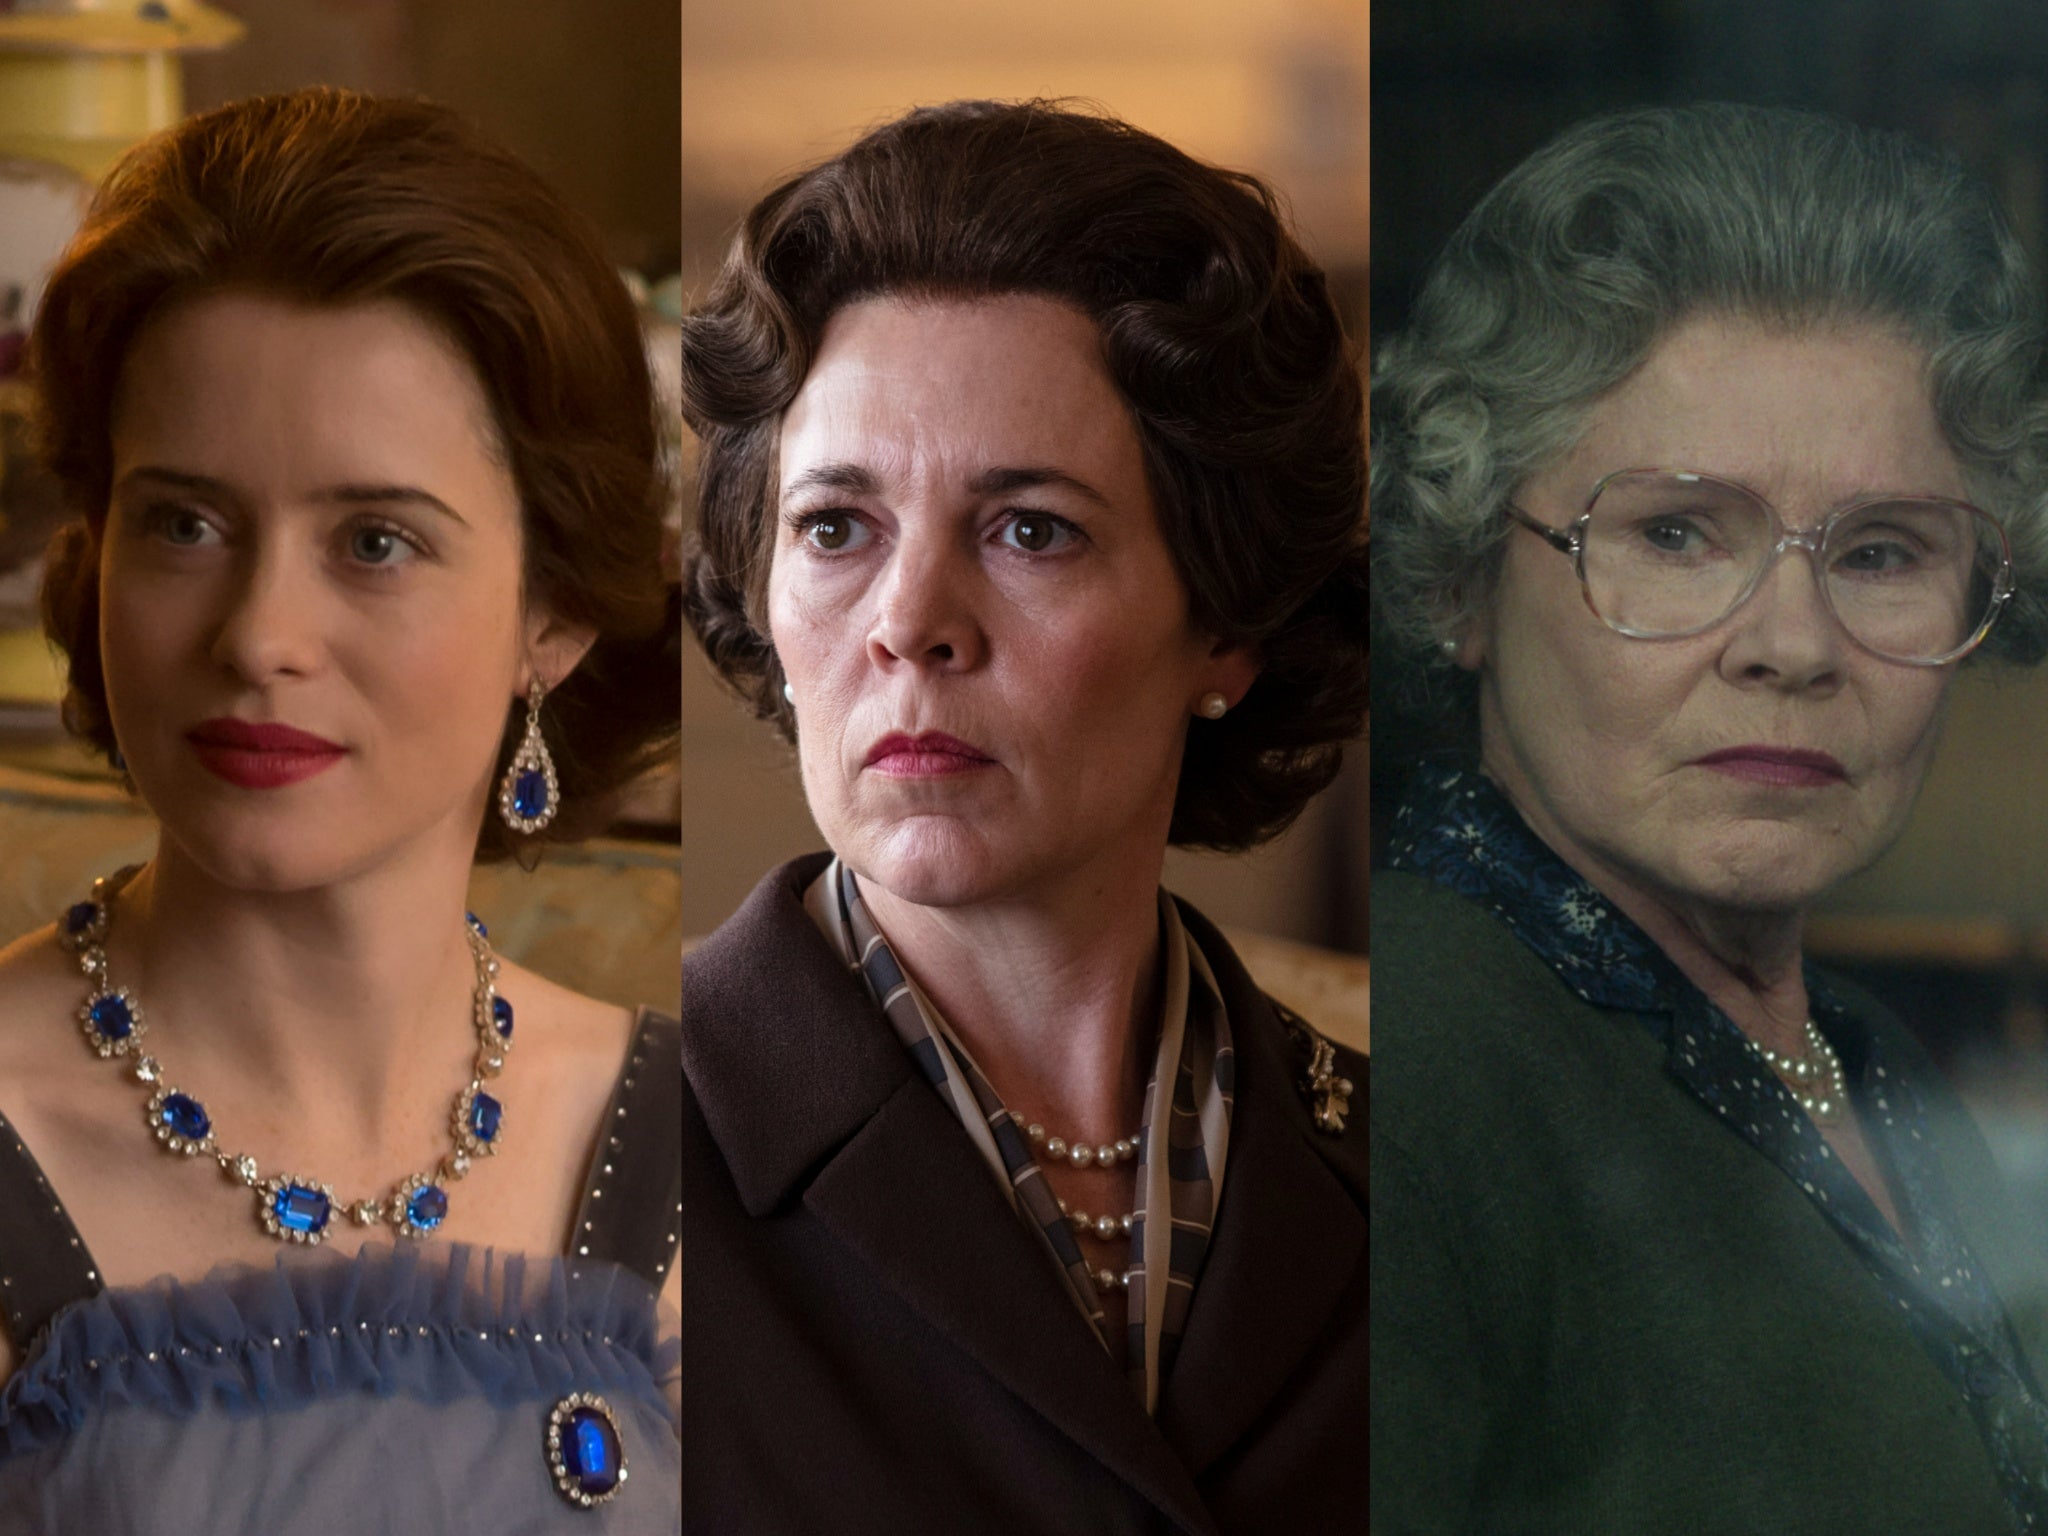 The queens of ‘The Crown’ - Claire Foy, Olivia Colman and Imelda Staunton